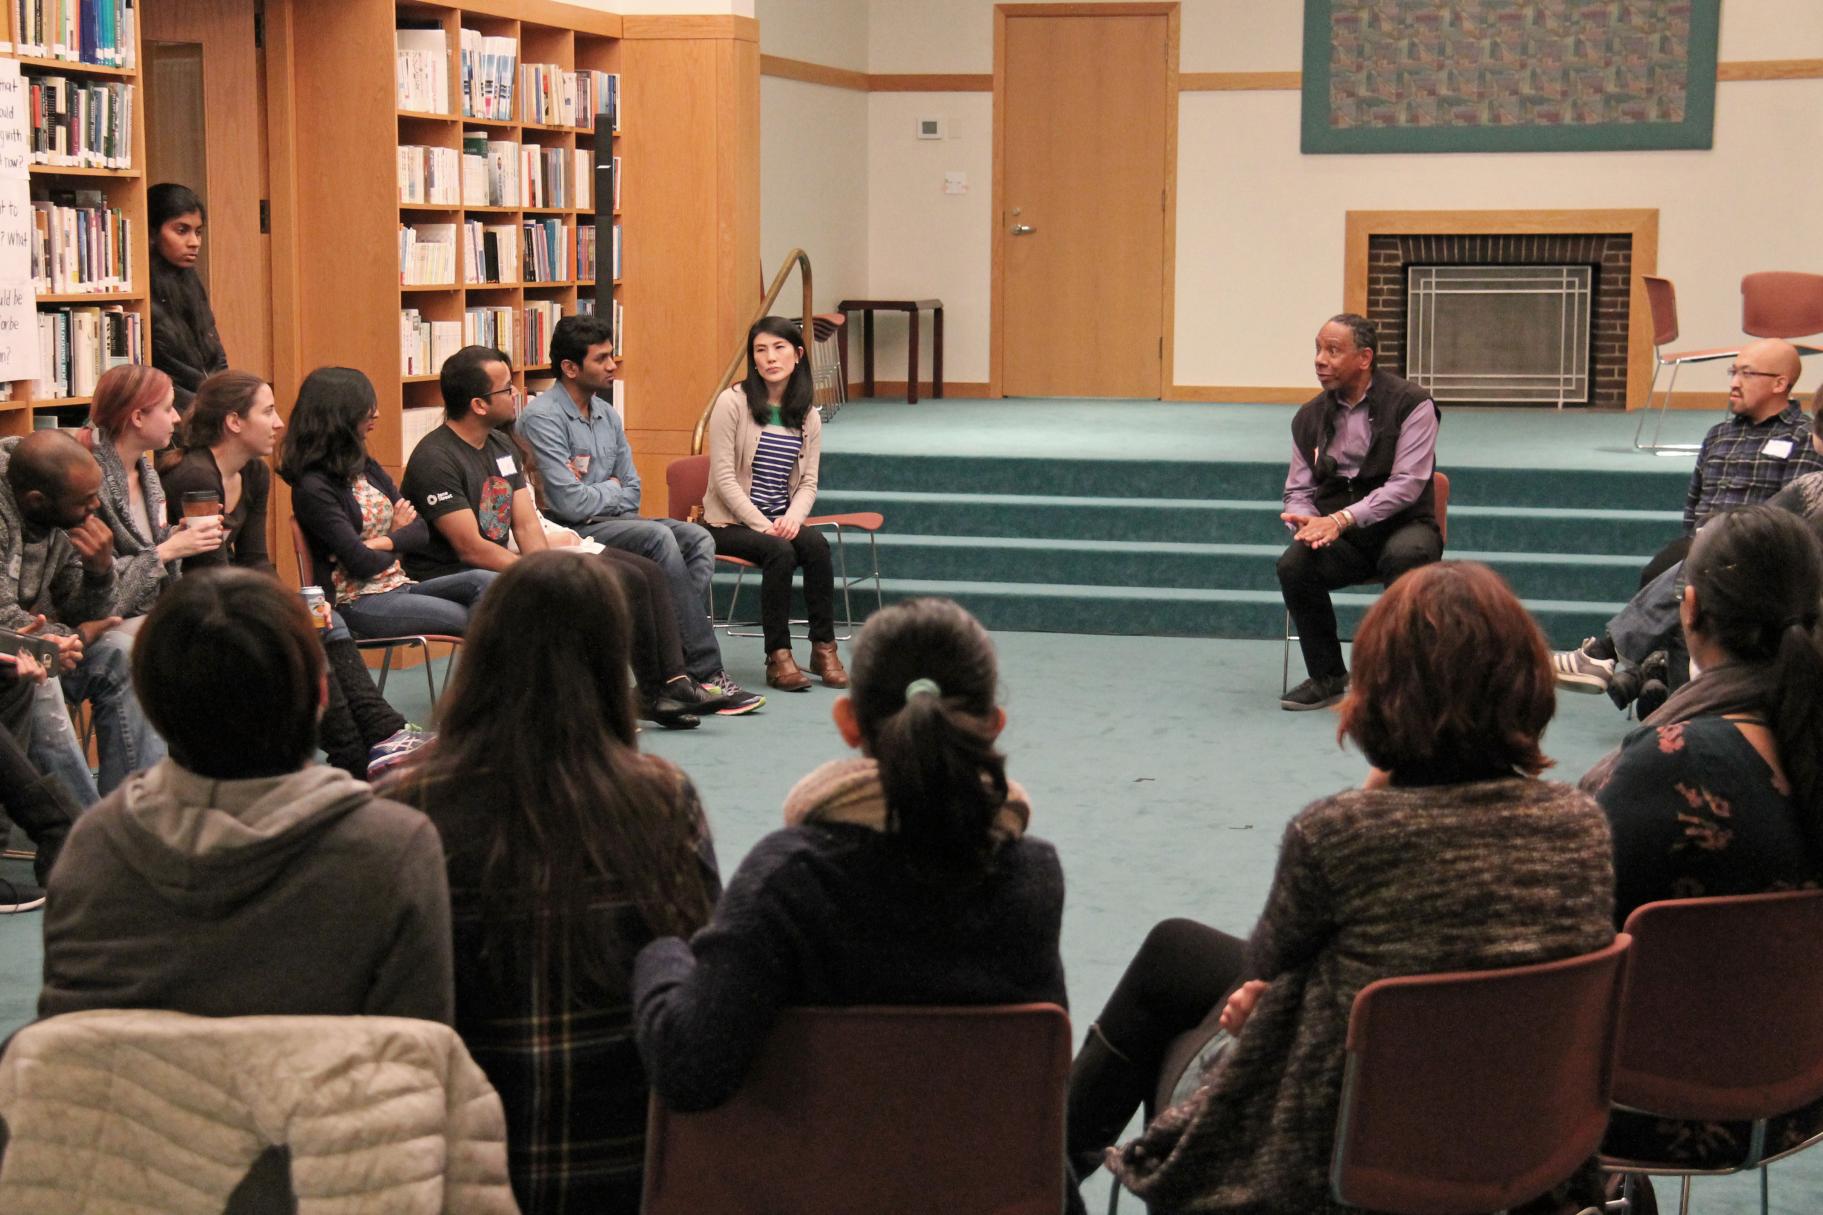 Reflections during Dialogue Nights on the power of raised voices